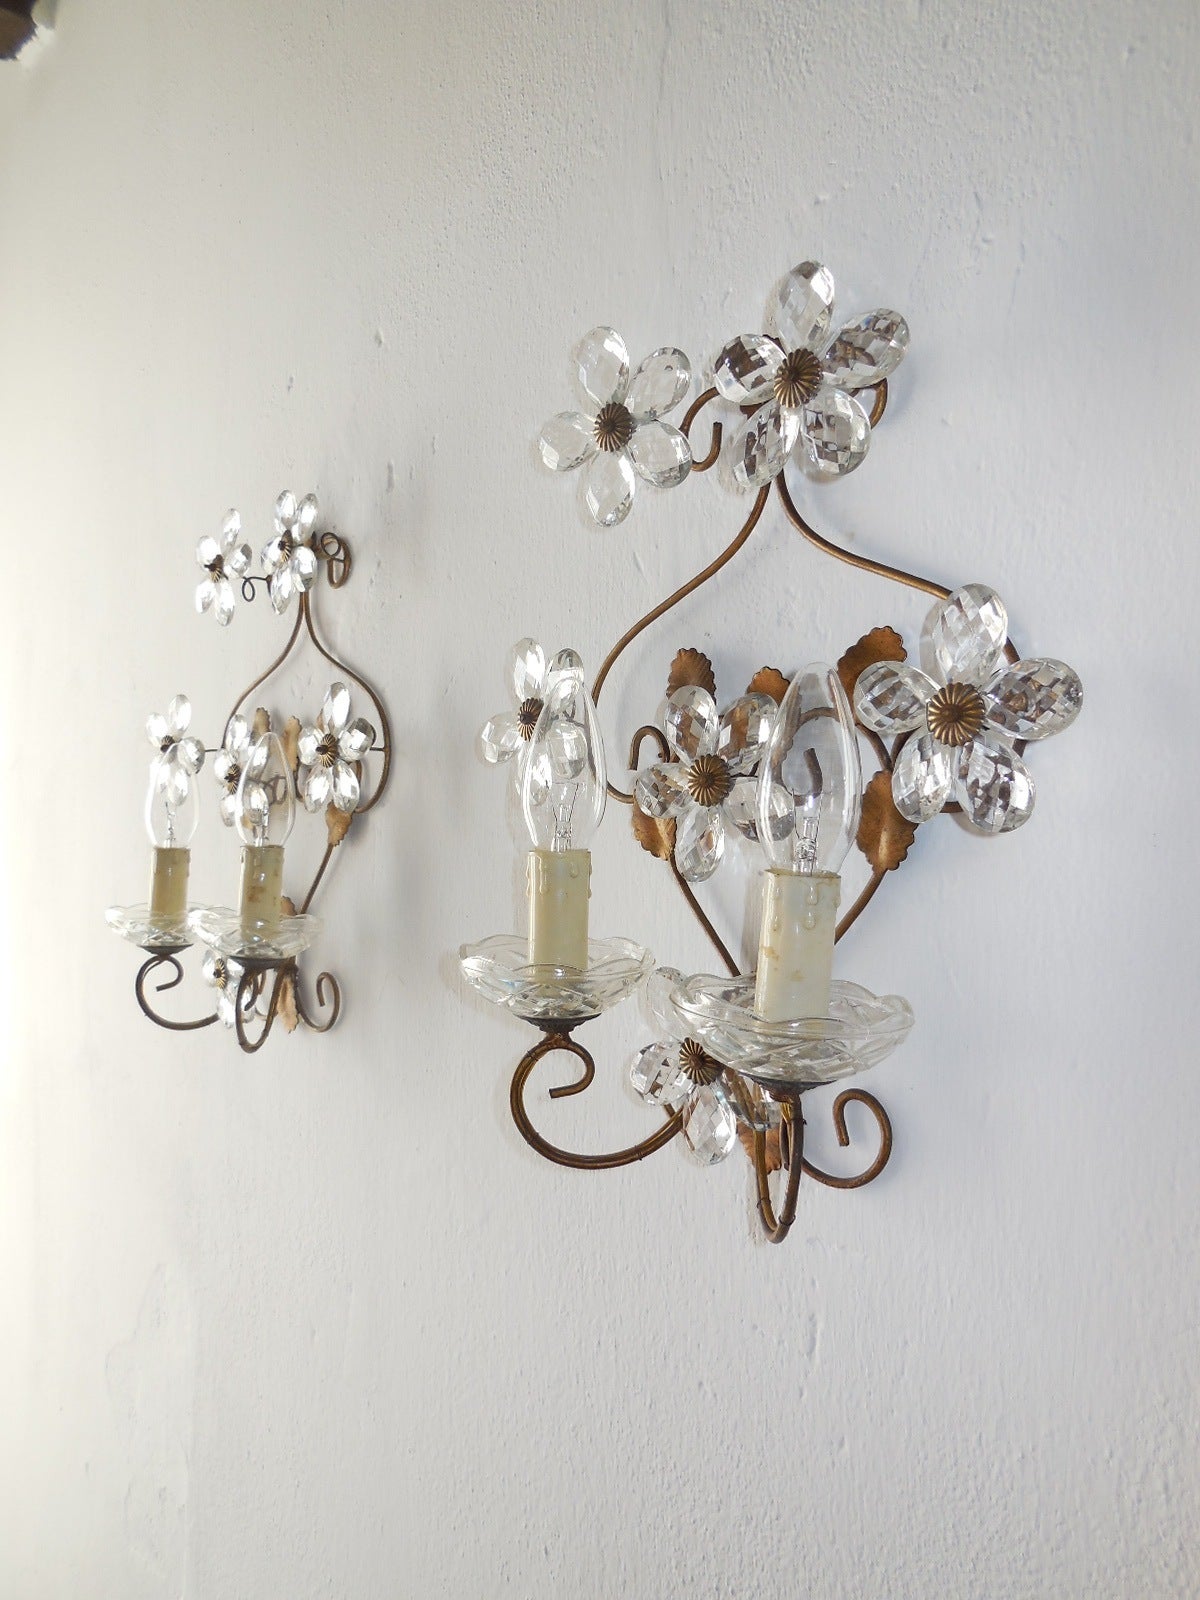 Housing 2 lights each, sitting in crystal bobeches. Gold gilt tole leaves with 6 crystal prism flowers on each. These are made in the Maison Bagues style. Re-wired and ready to hang! Free priority shipping from Italy.